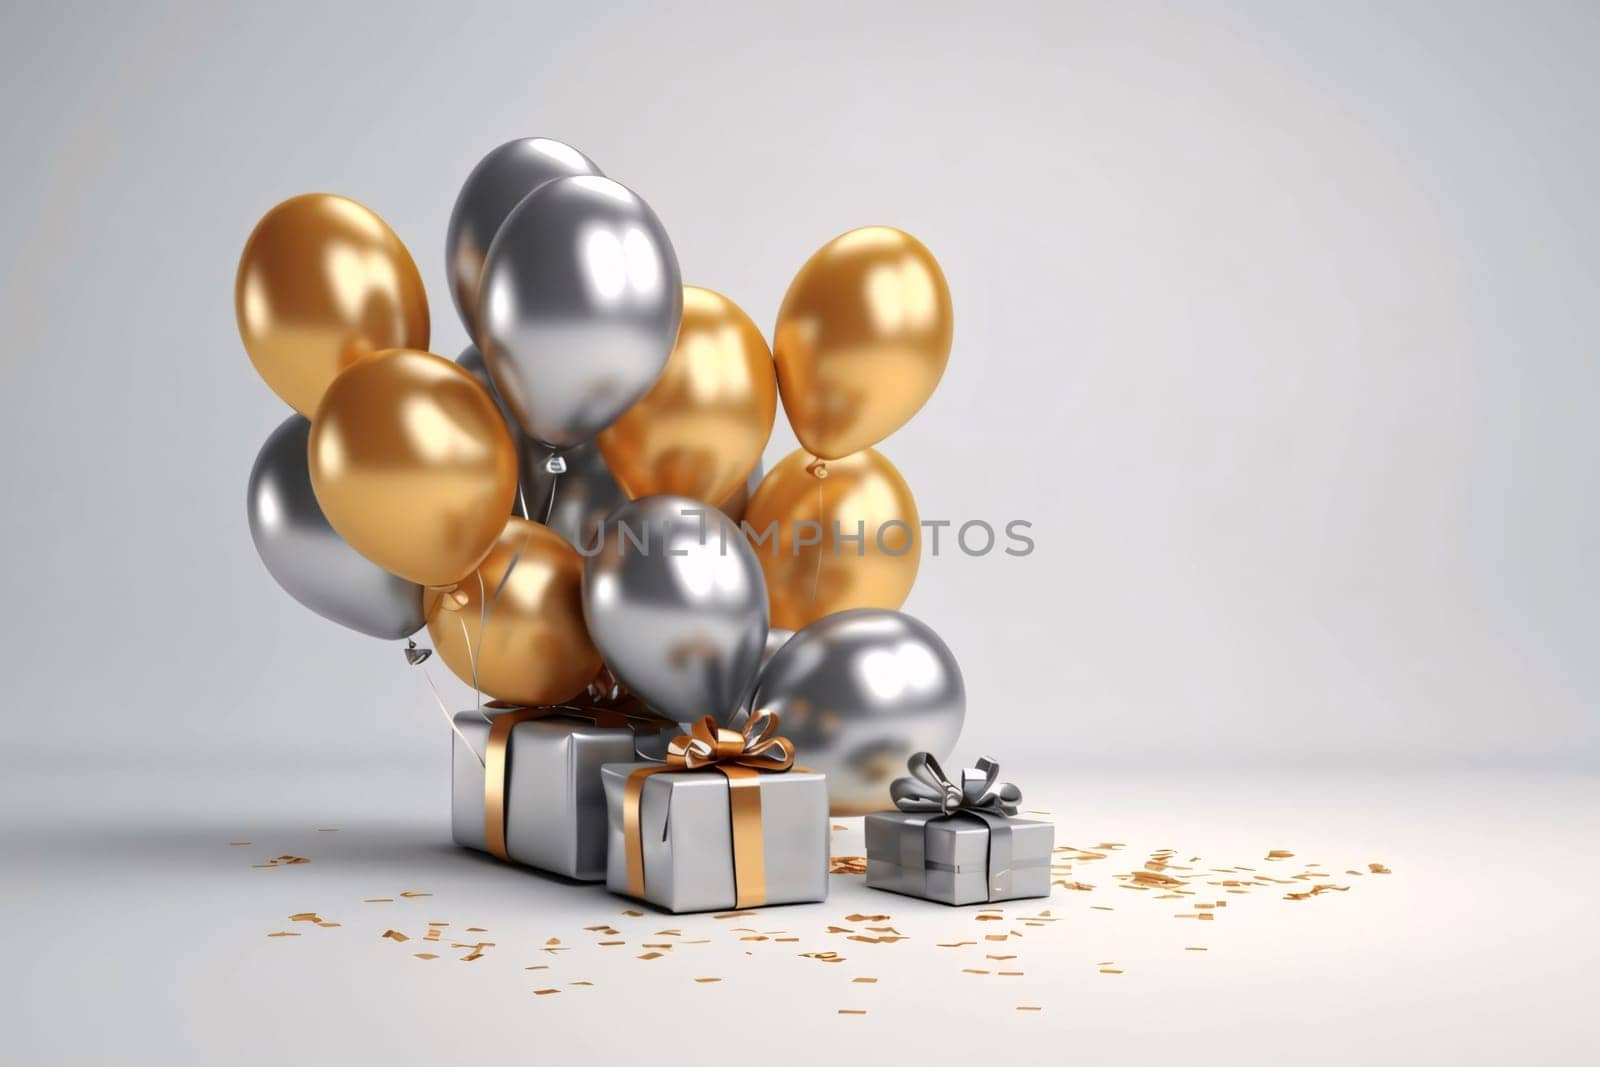 Silver and gold balloons and gifts with bow, confetti bright background.Valentine's Day banner with space for your own content. Heart as a symbol of affection and love.